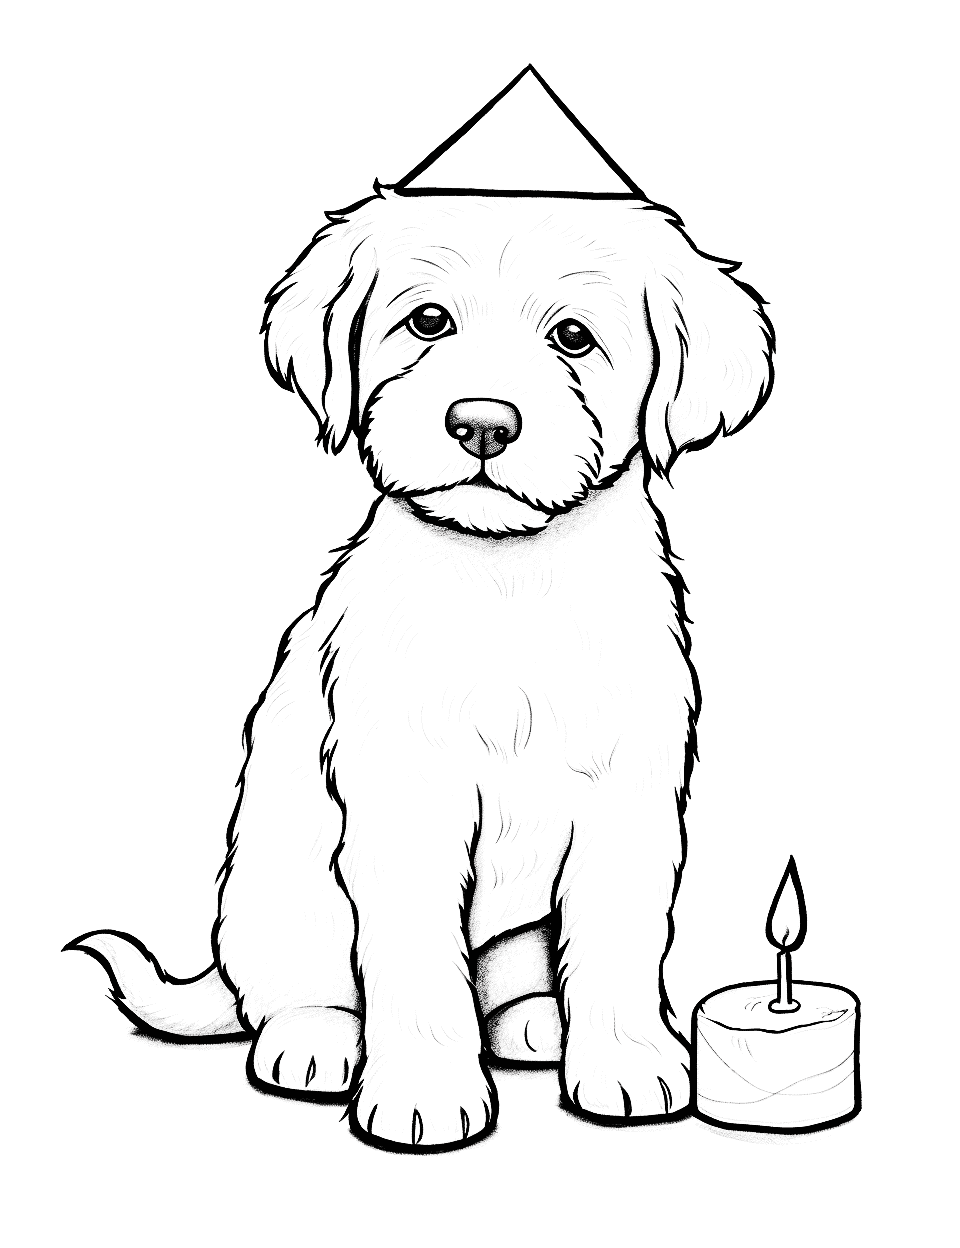 Birthday Bash Goldendoodle with Cake Puppy Coloring Page - A Goldendoodle puppy with a birthday cake and a party hat.